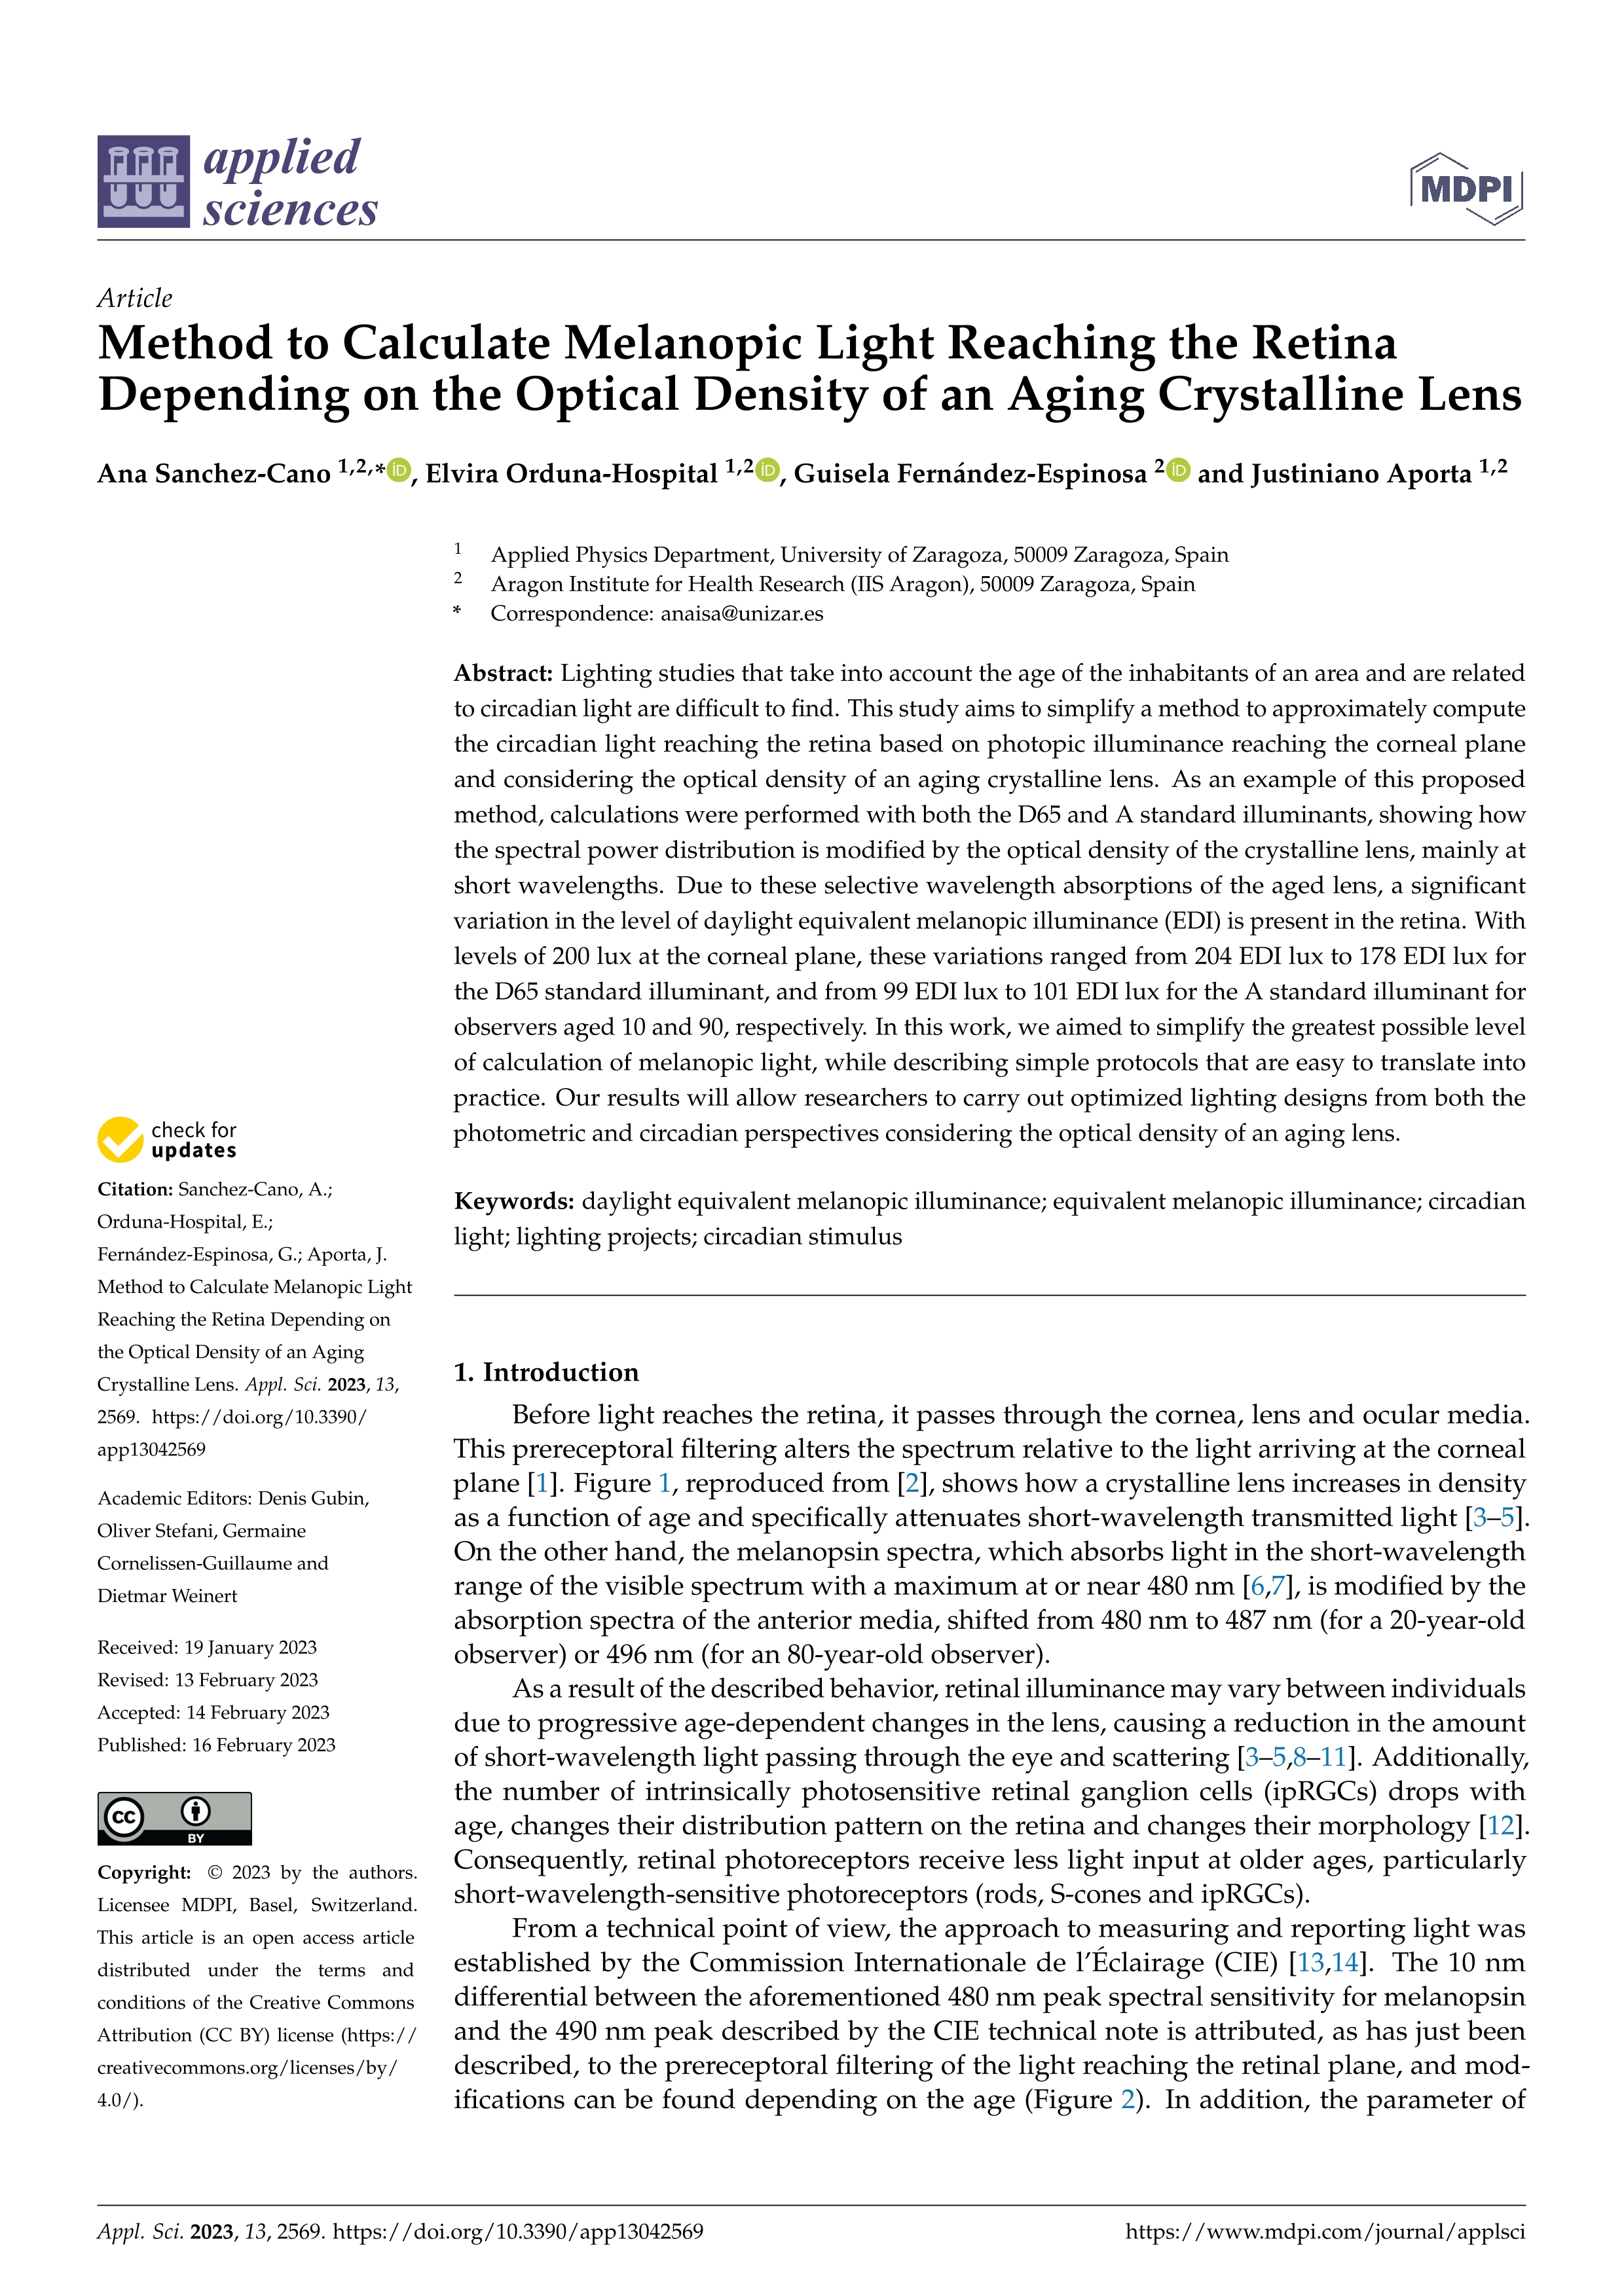 Method to calculate melanopic light reaching the retina depending on the optical density of an aging crystalline lens